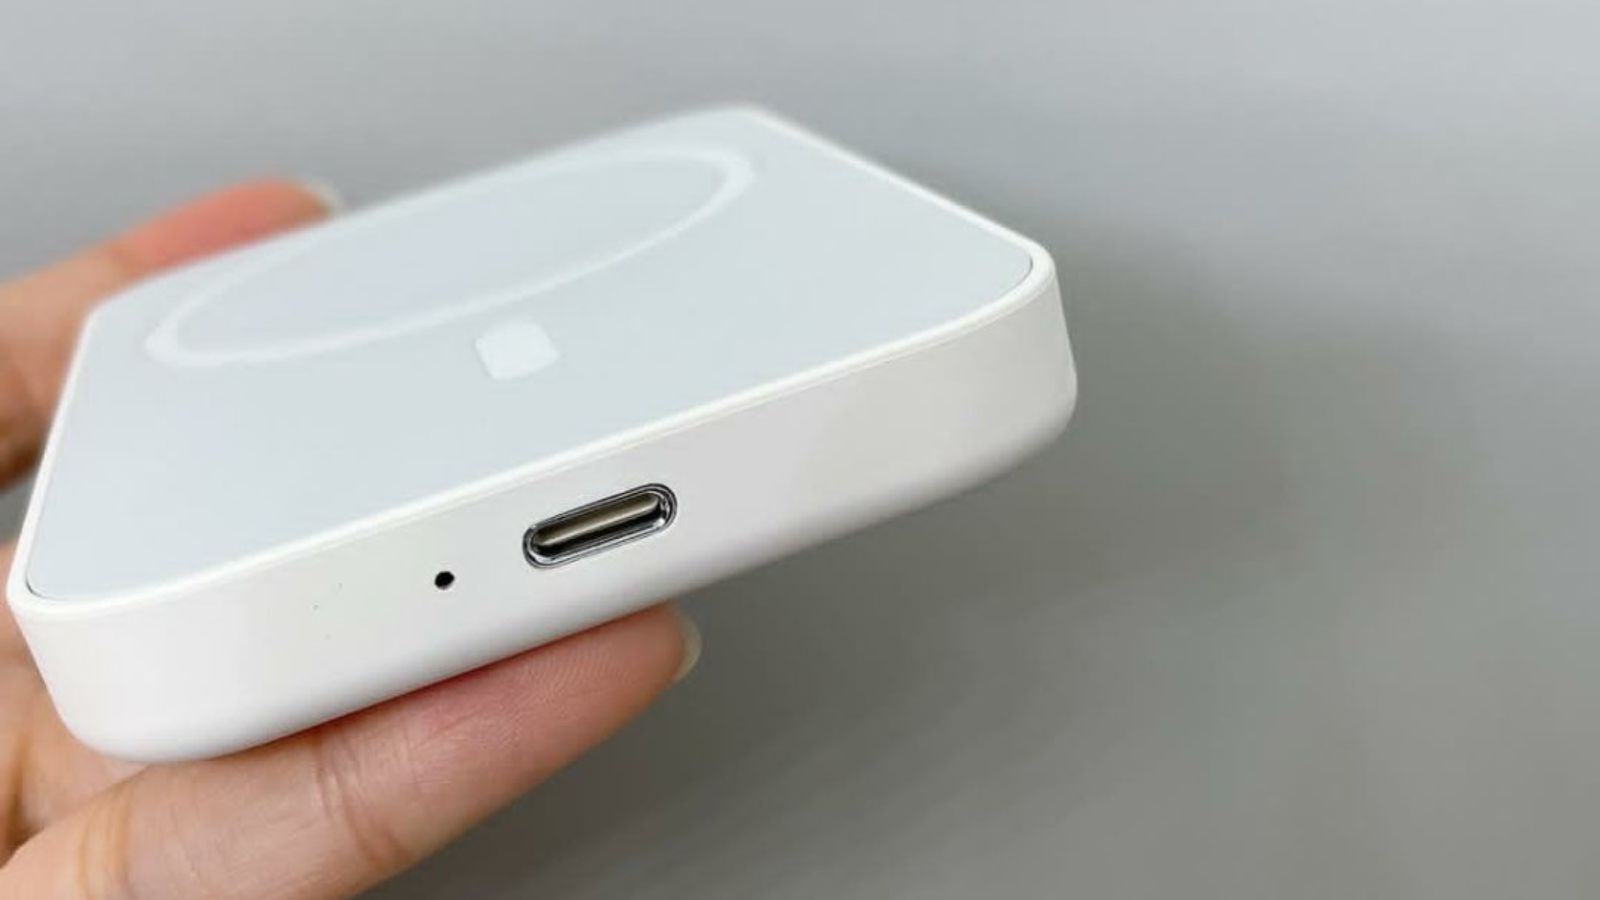 Apple MagSafe Battery Pack: Portable Power Banks